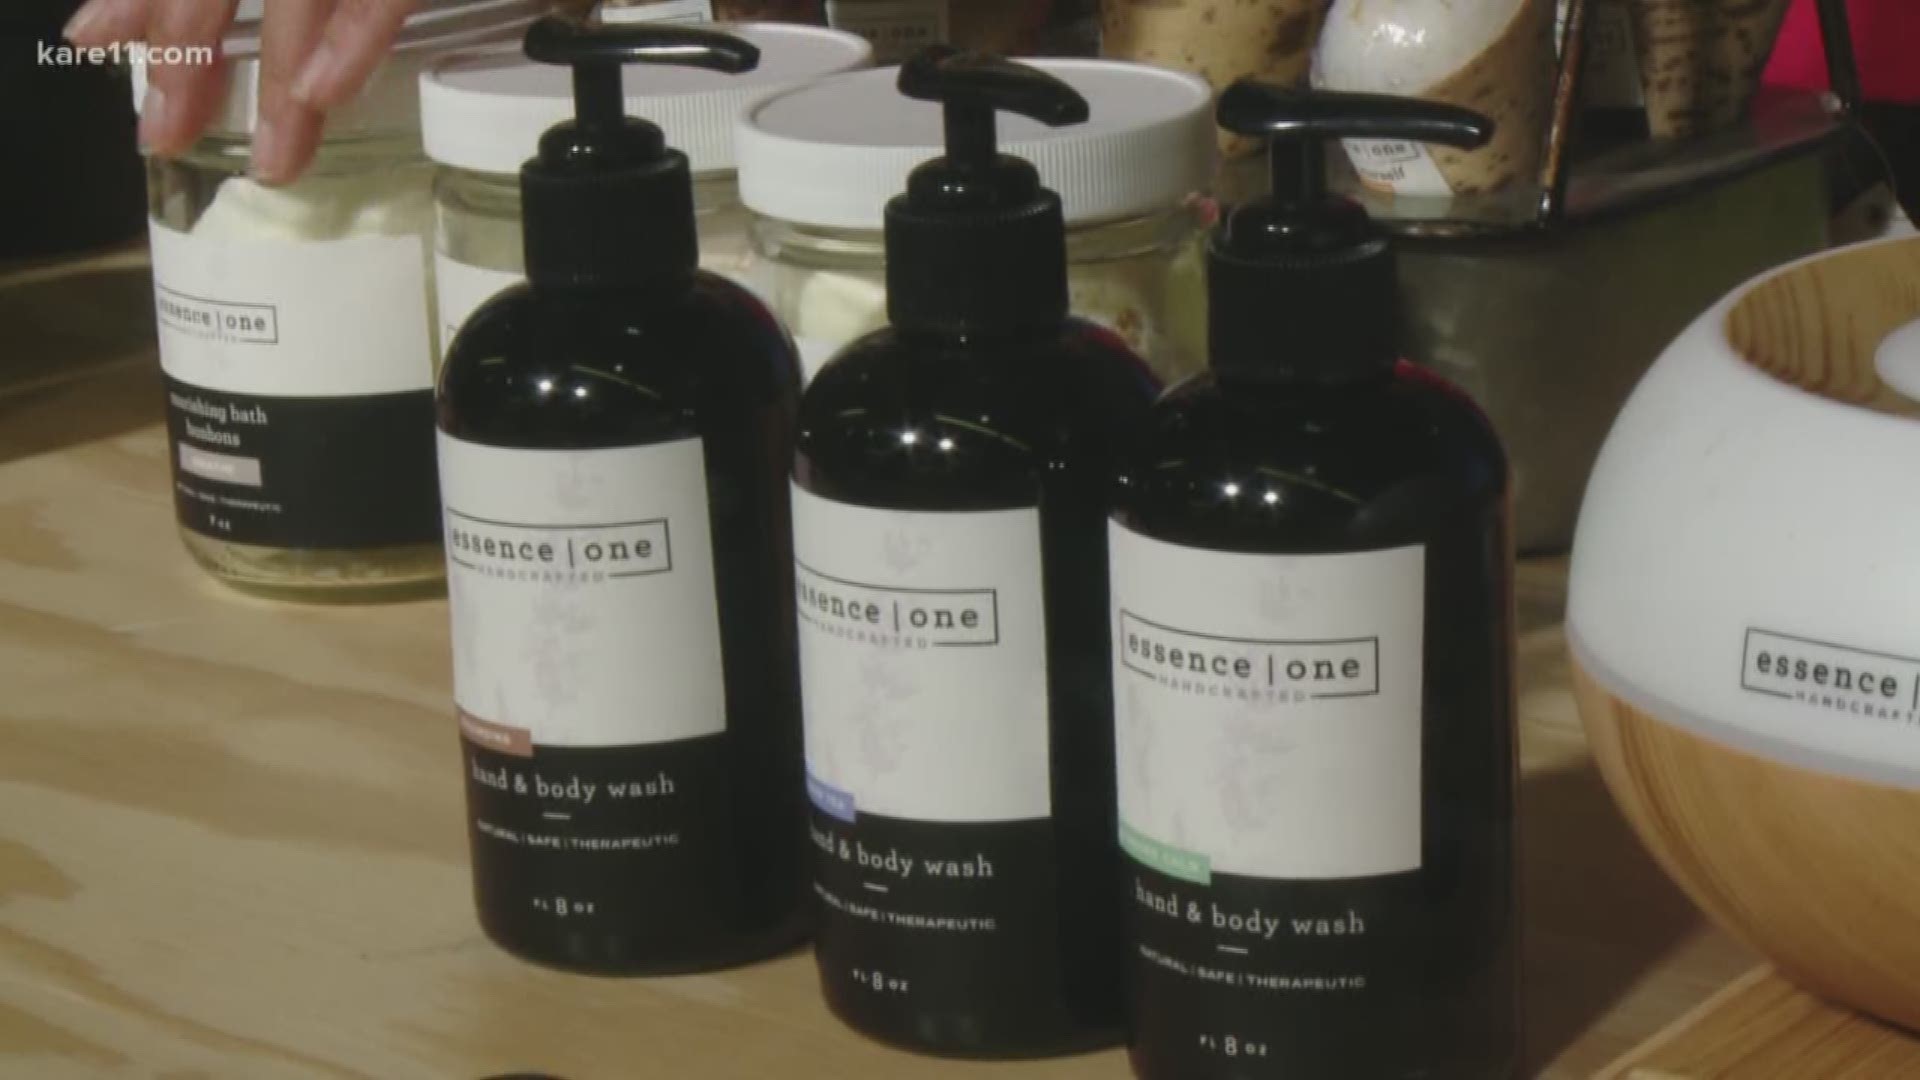 A local company, Essence One, offers aromatherapy while working to raise mental health awareness. https://kare11.tv/2N67EJQ